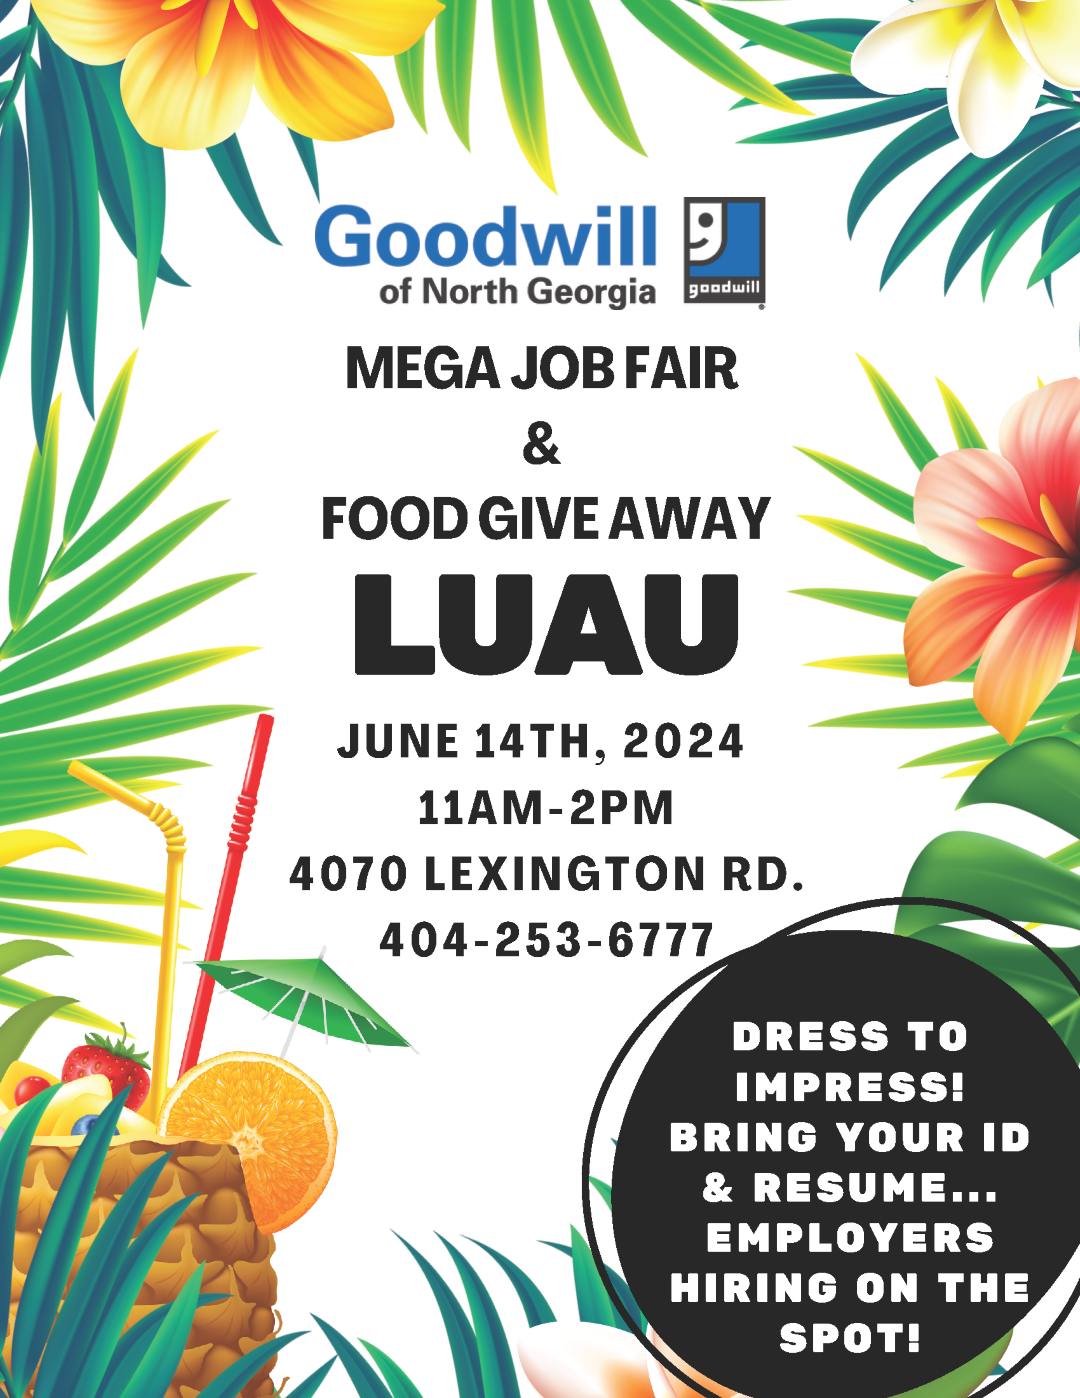 Flier for Goodwill Luau Job Fair and Resource Fair June 14 2024 11am to 2pm Eastside Goodwill location at 4070 LEXINGTON RD.